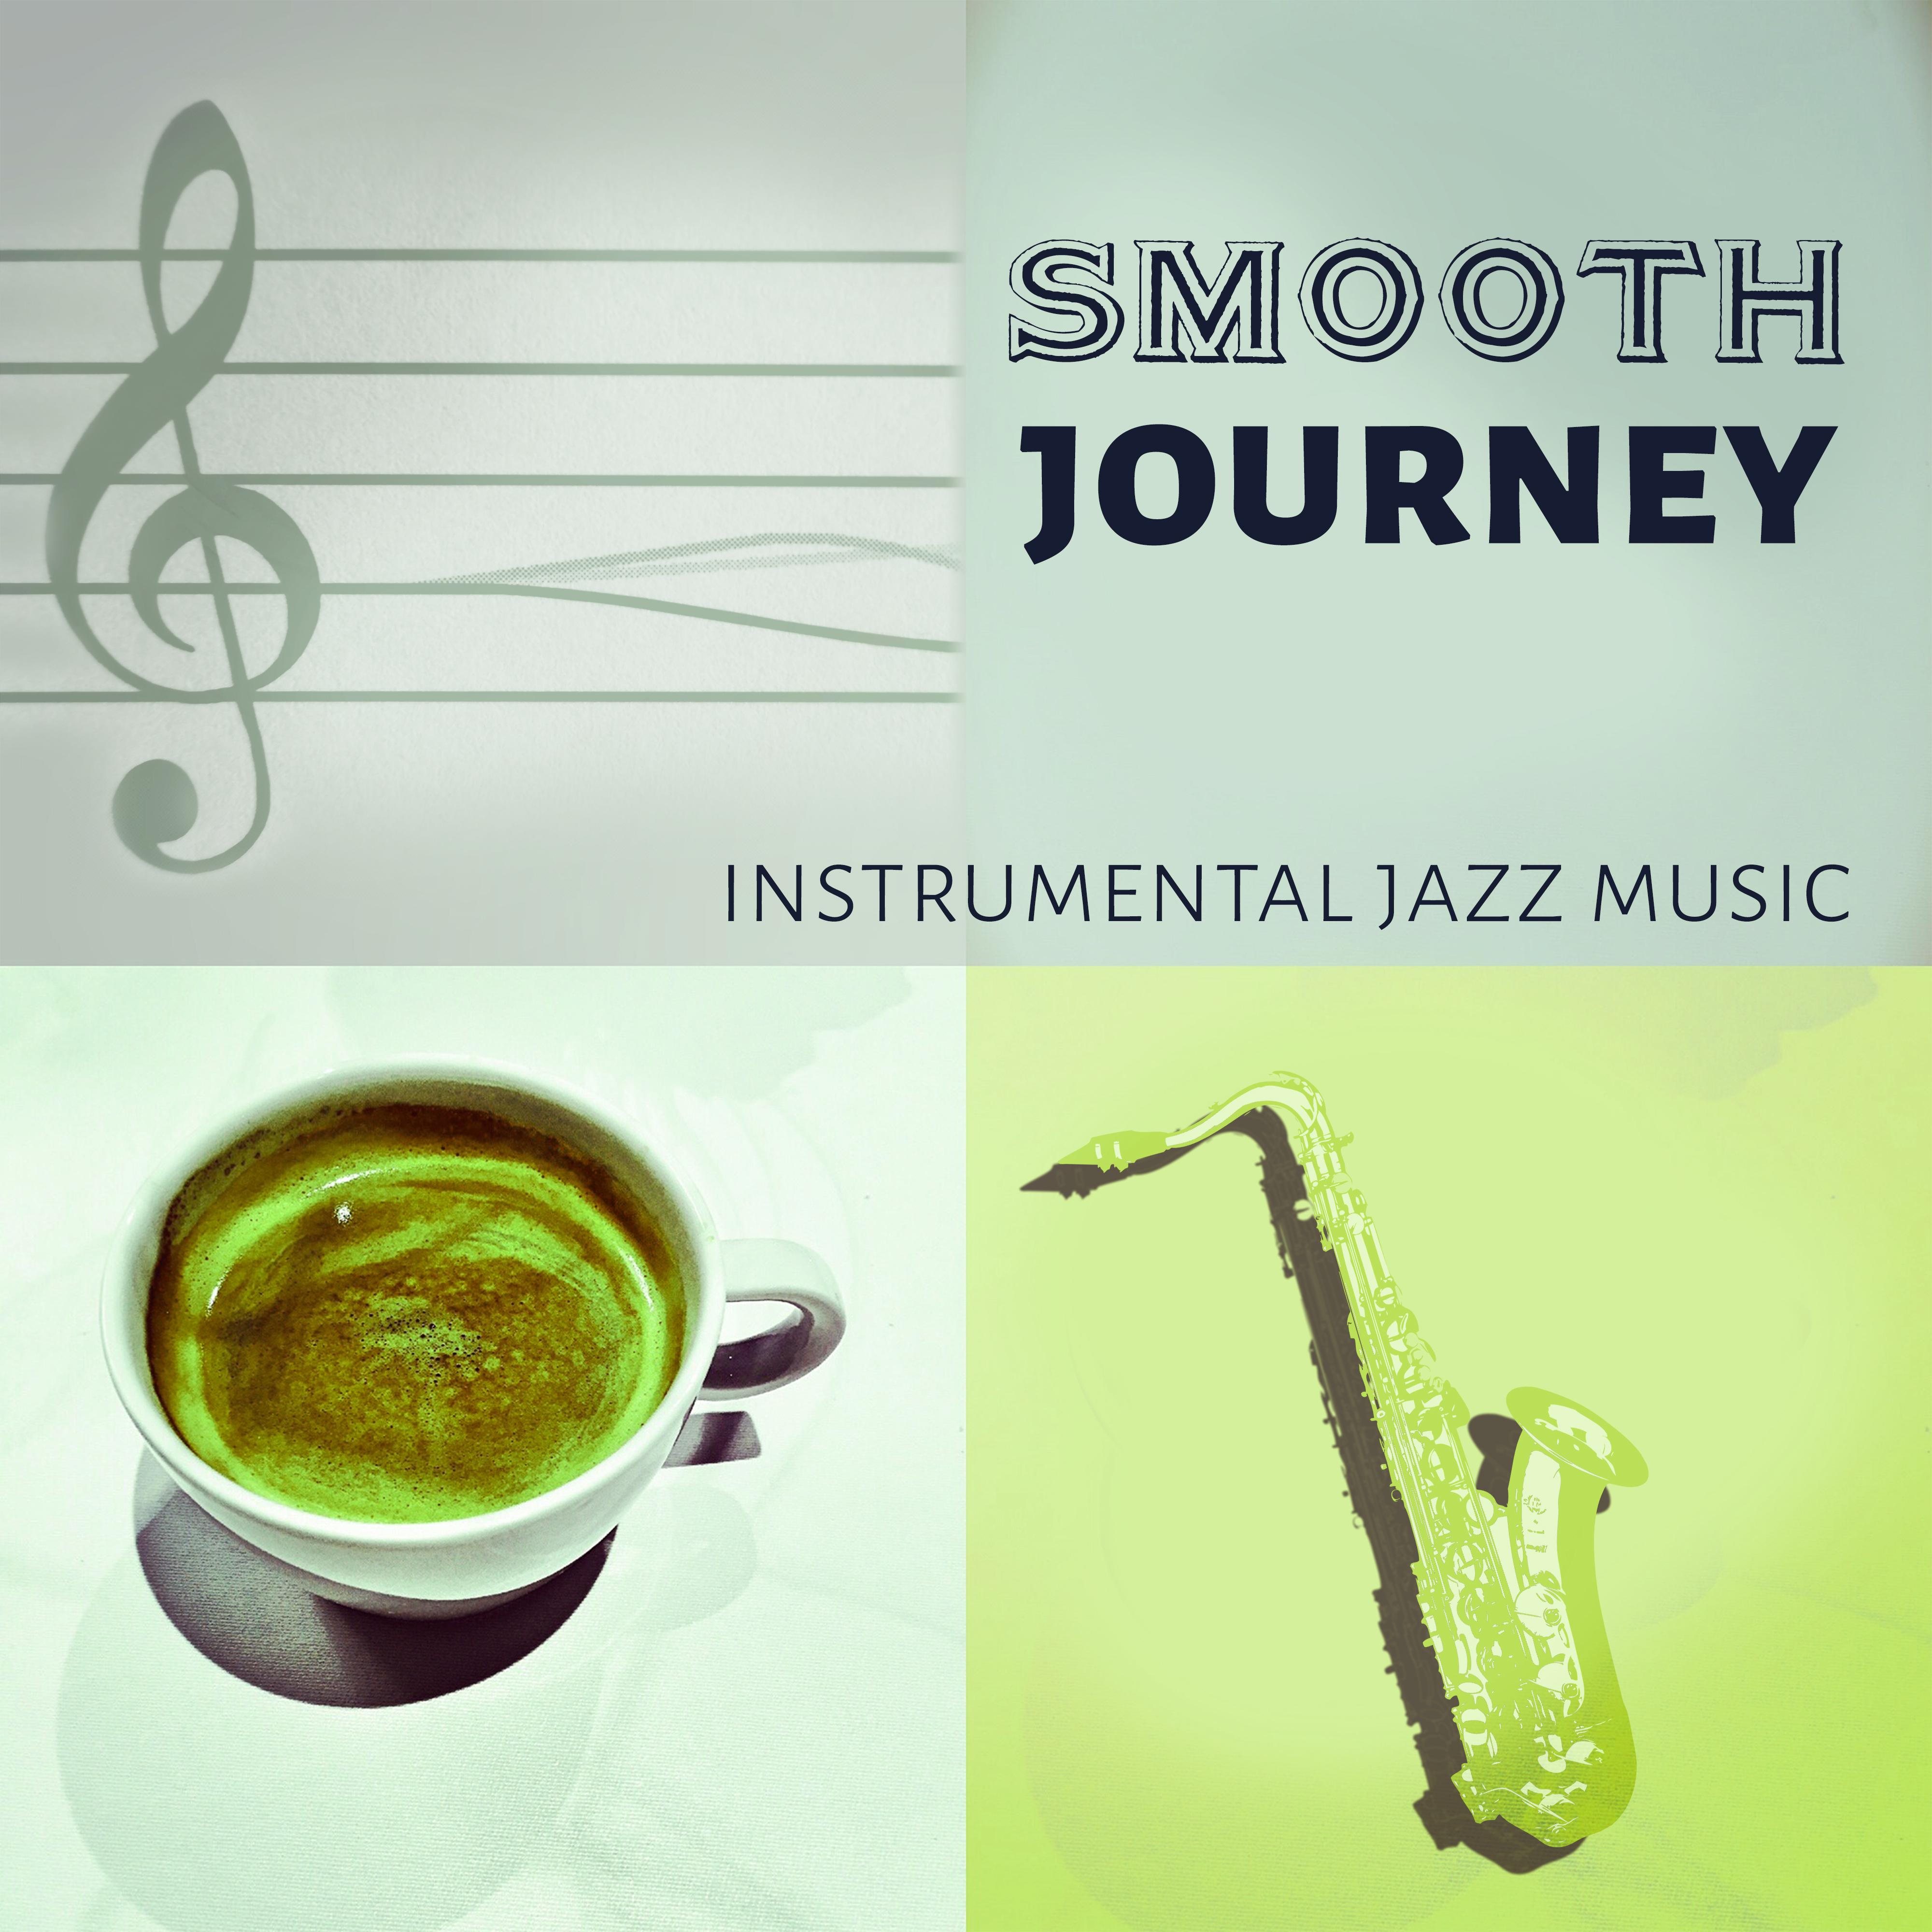 Smooth Journey - Instrumental Jazz Music, 15 Tracks to Relax, Total Relax, Homecoming, Piano Music, Wonderful Chill Out Music